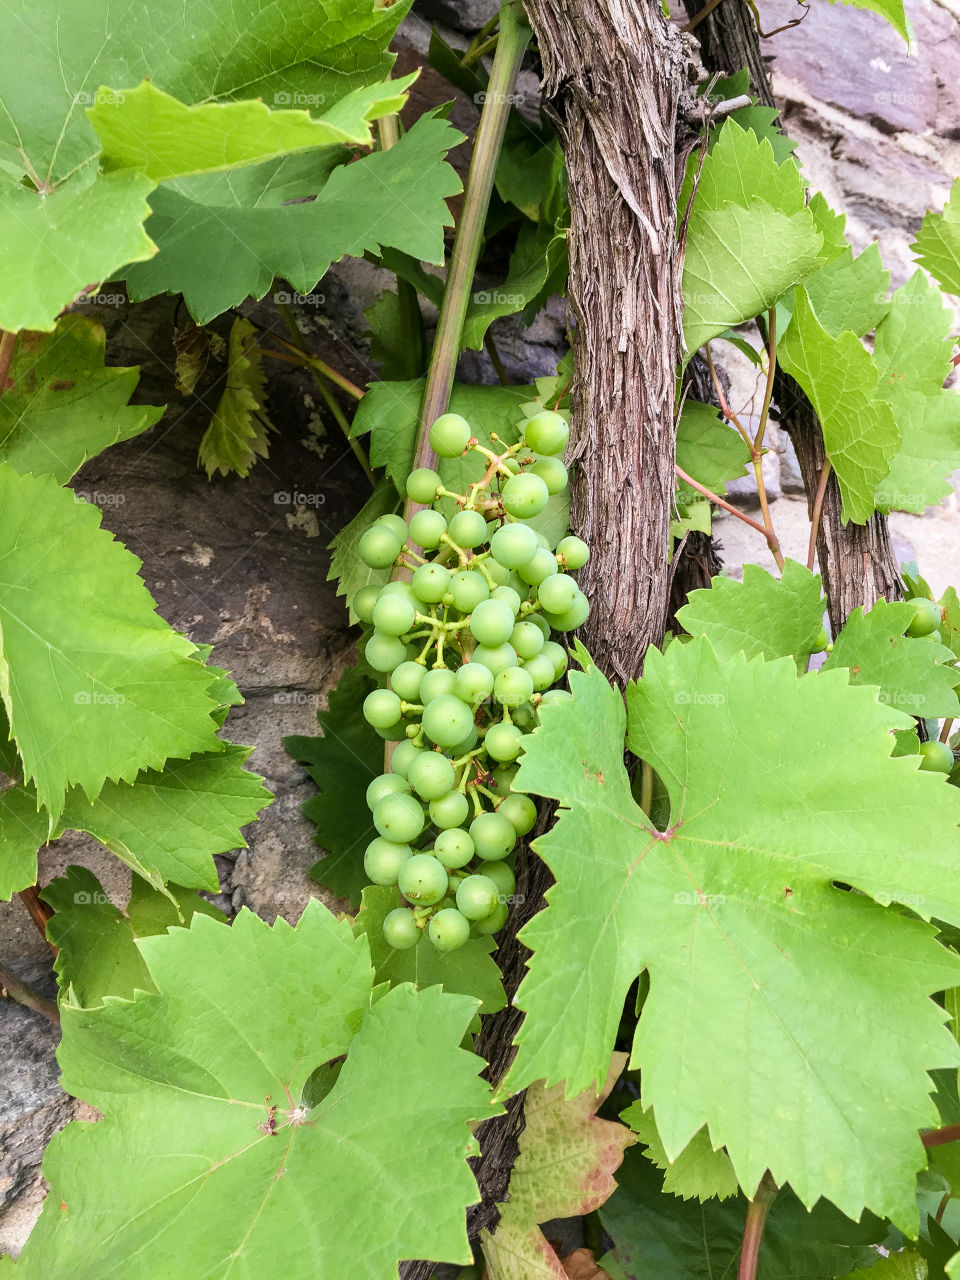 Vine plant with green leaves and unripe riesling grapes in clusters growing against a stone wall in Germany in the summer.